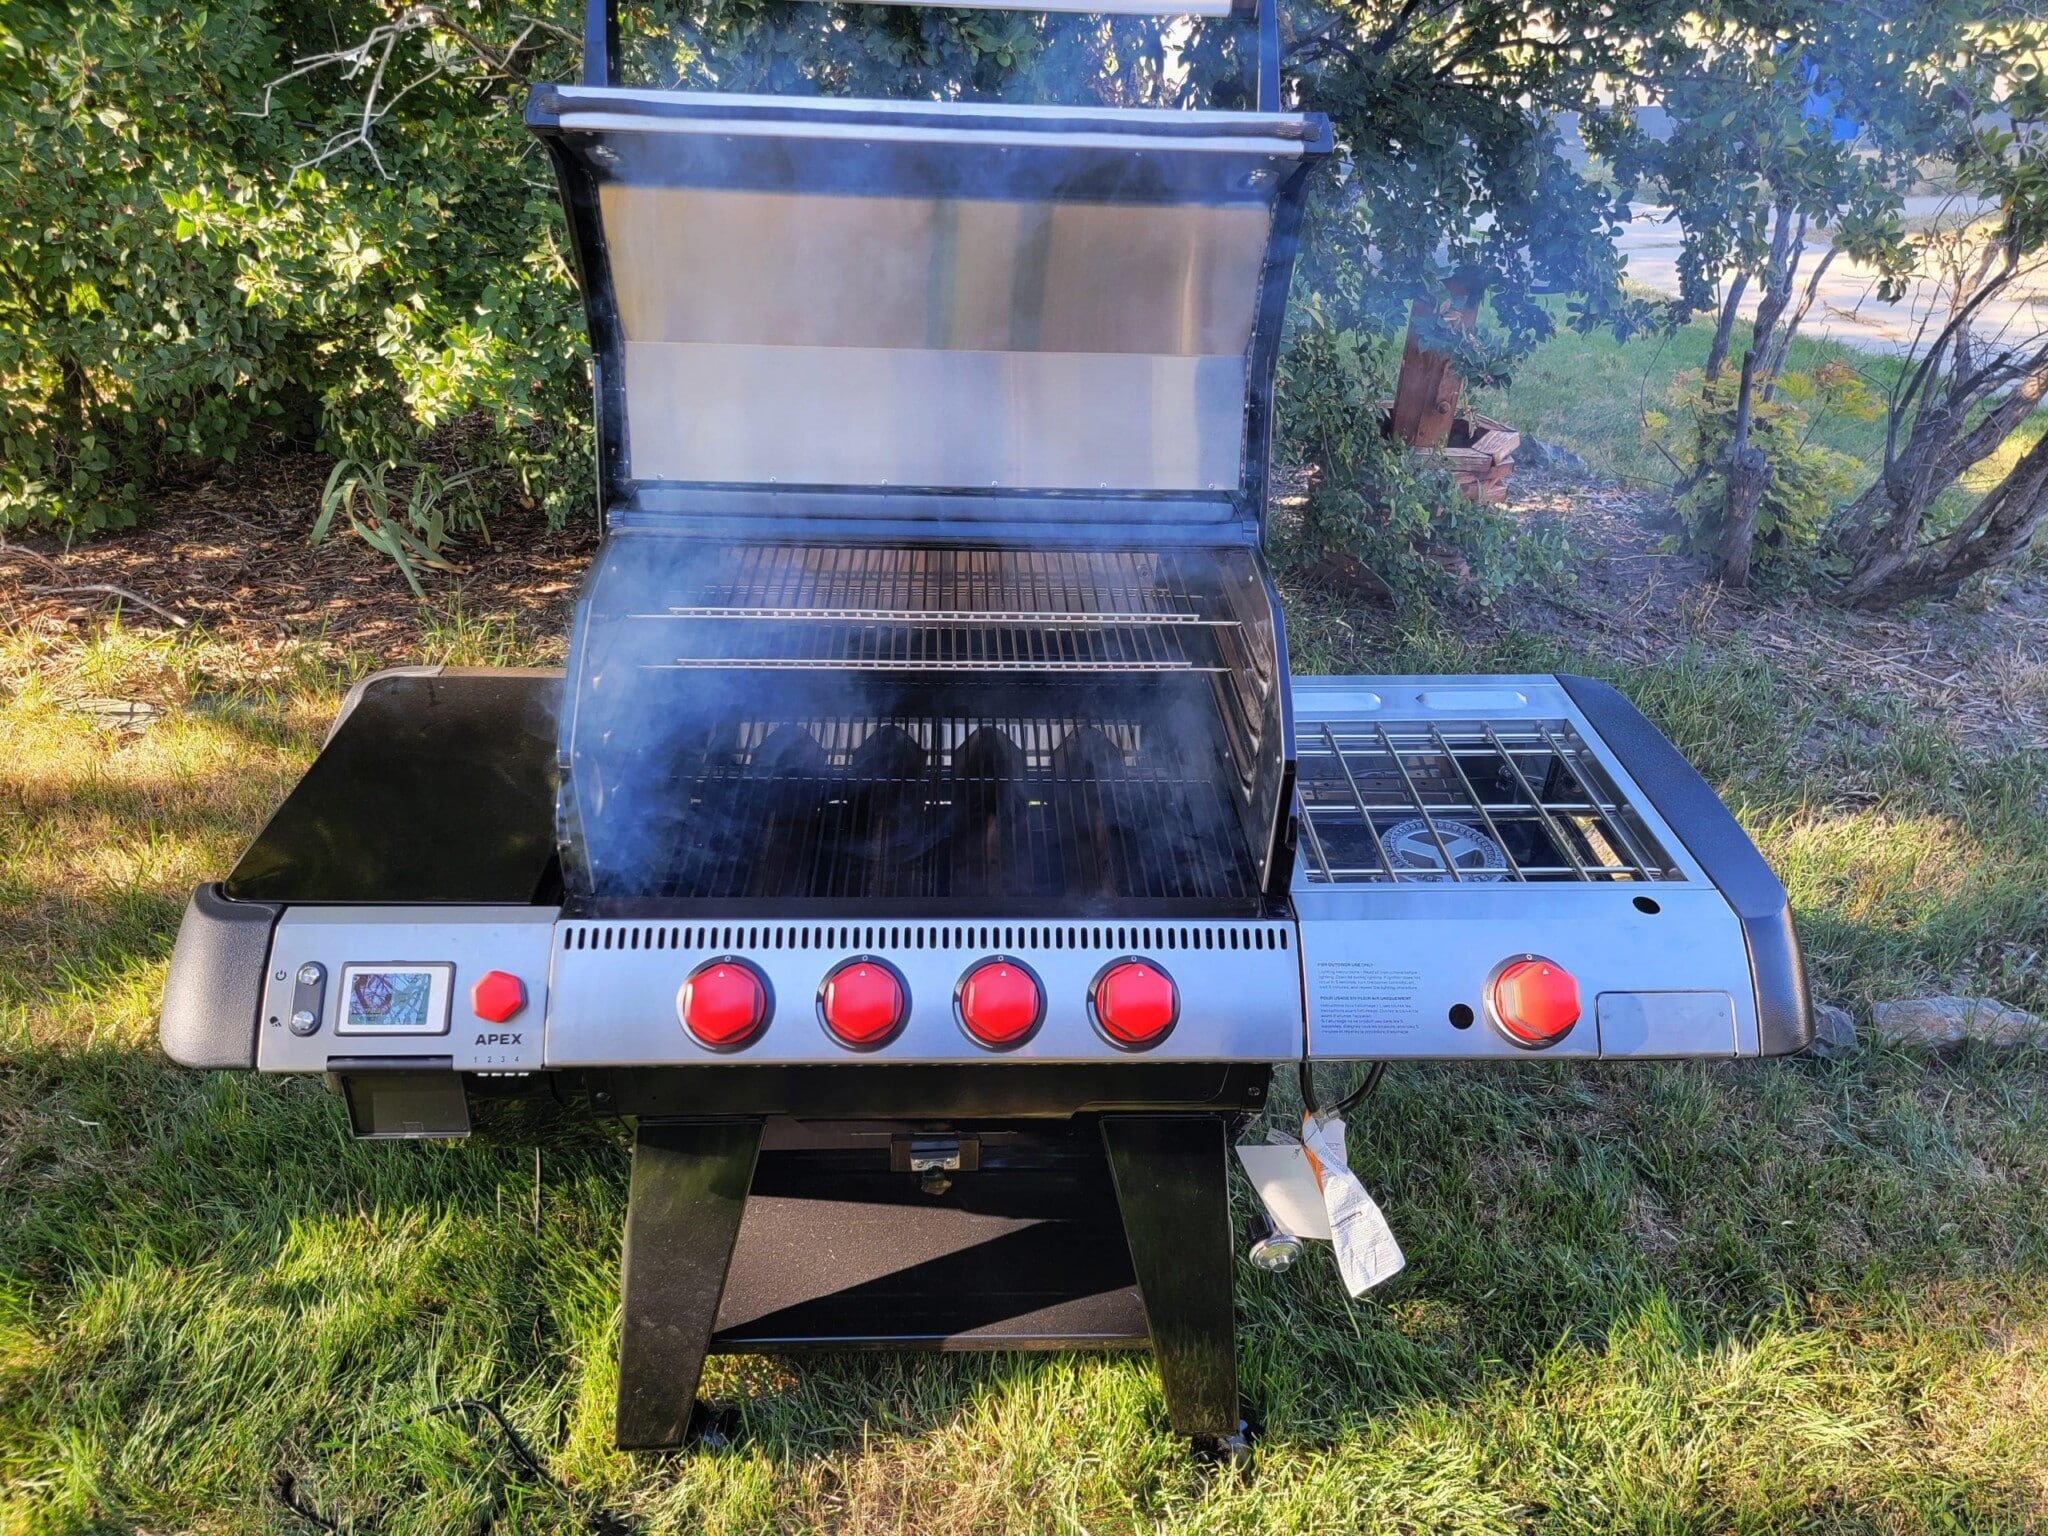 Apex grill on grass with lid open and smoke coming out